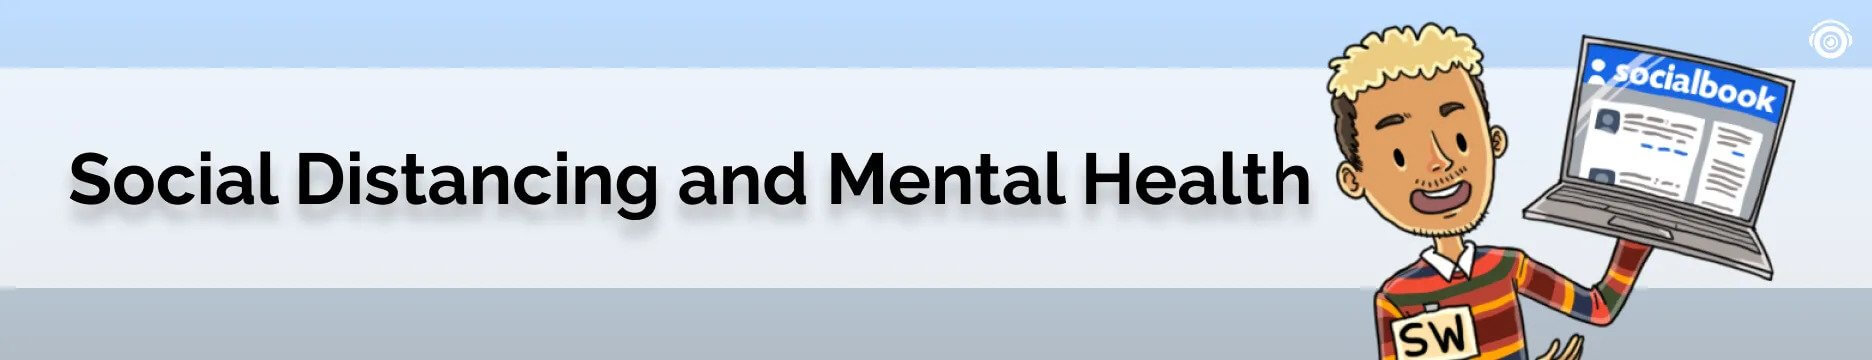 social distancing and mental health banner